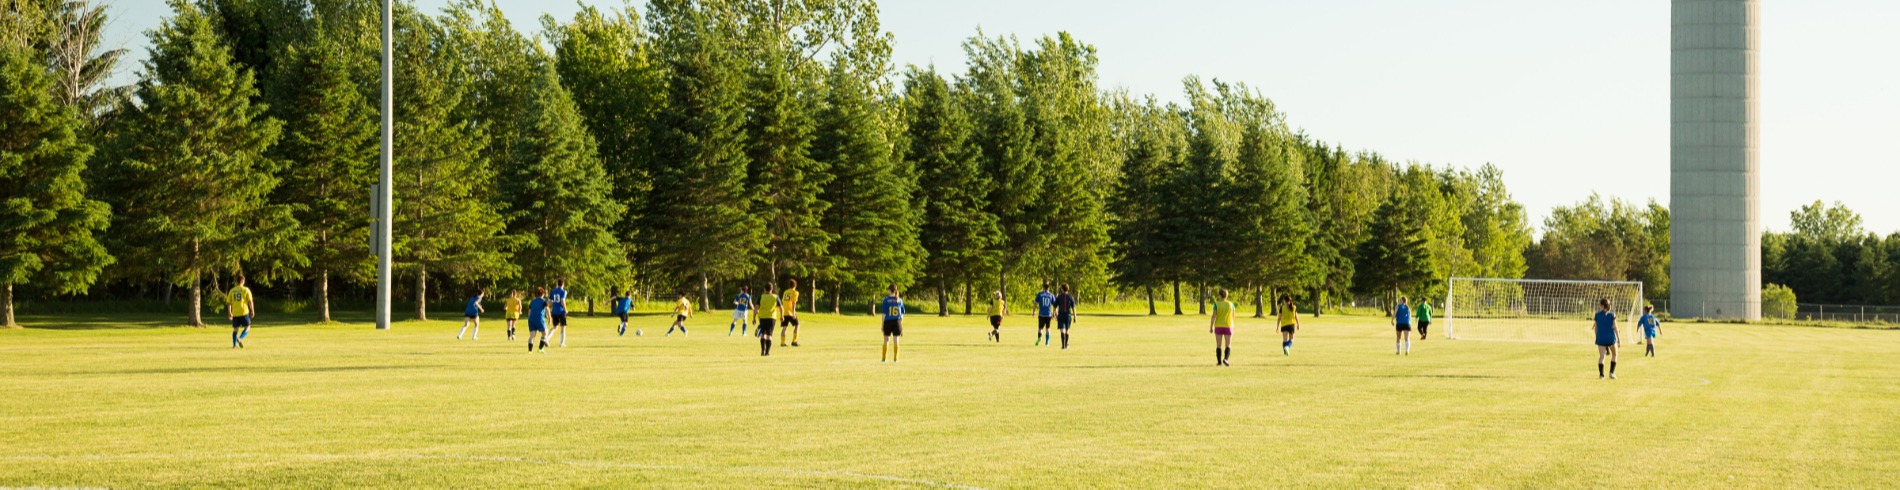 Soccer players in Cheney Park 